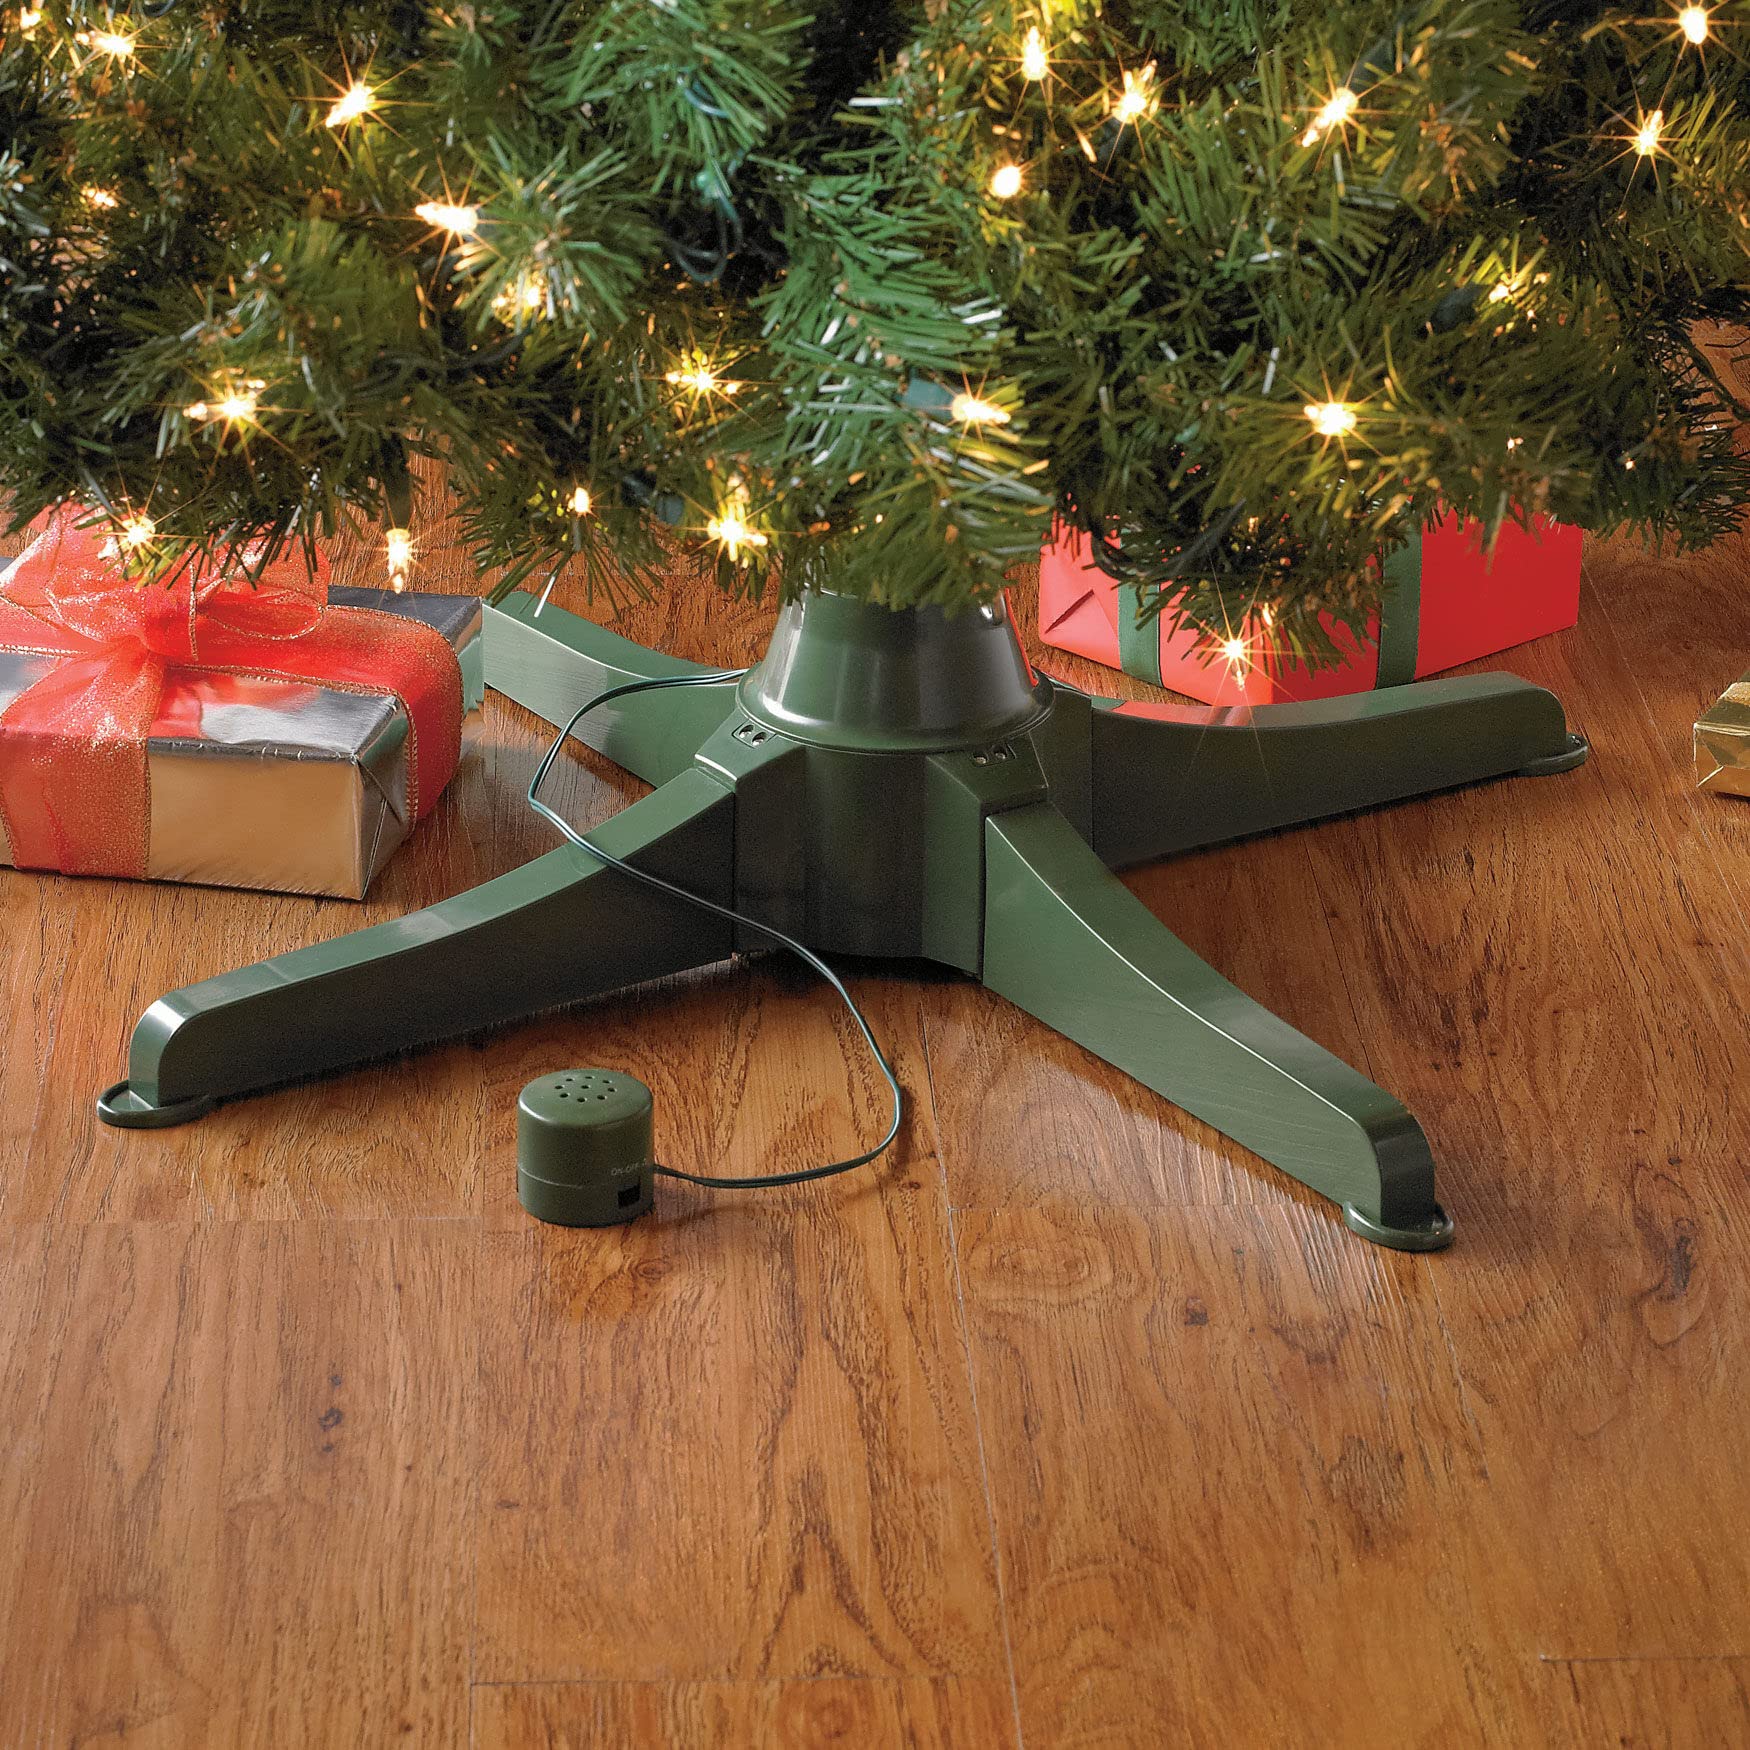 Where To Buy A Christmas Tree Stand?